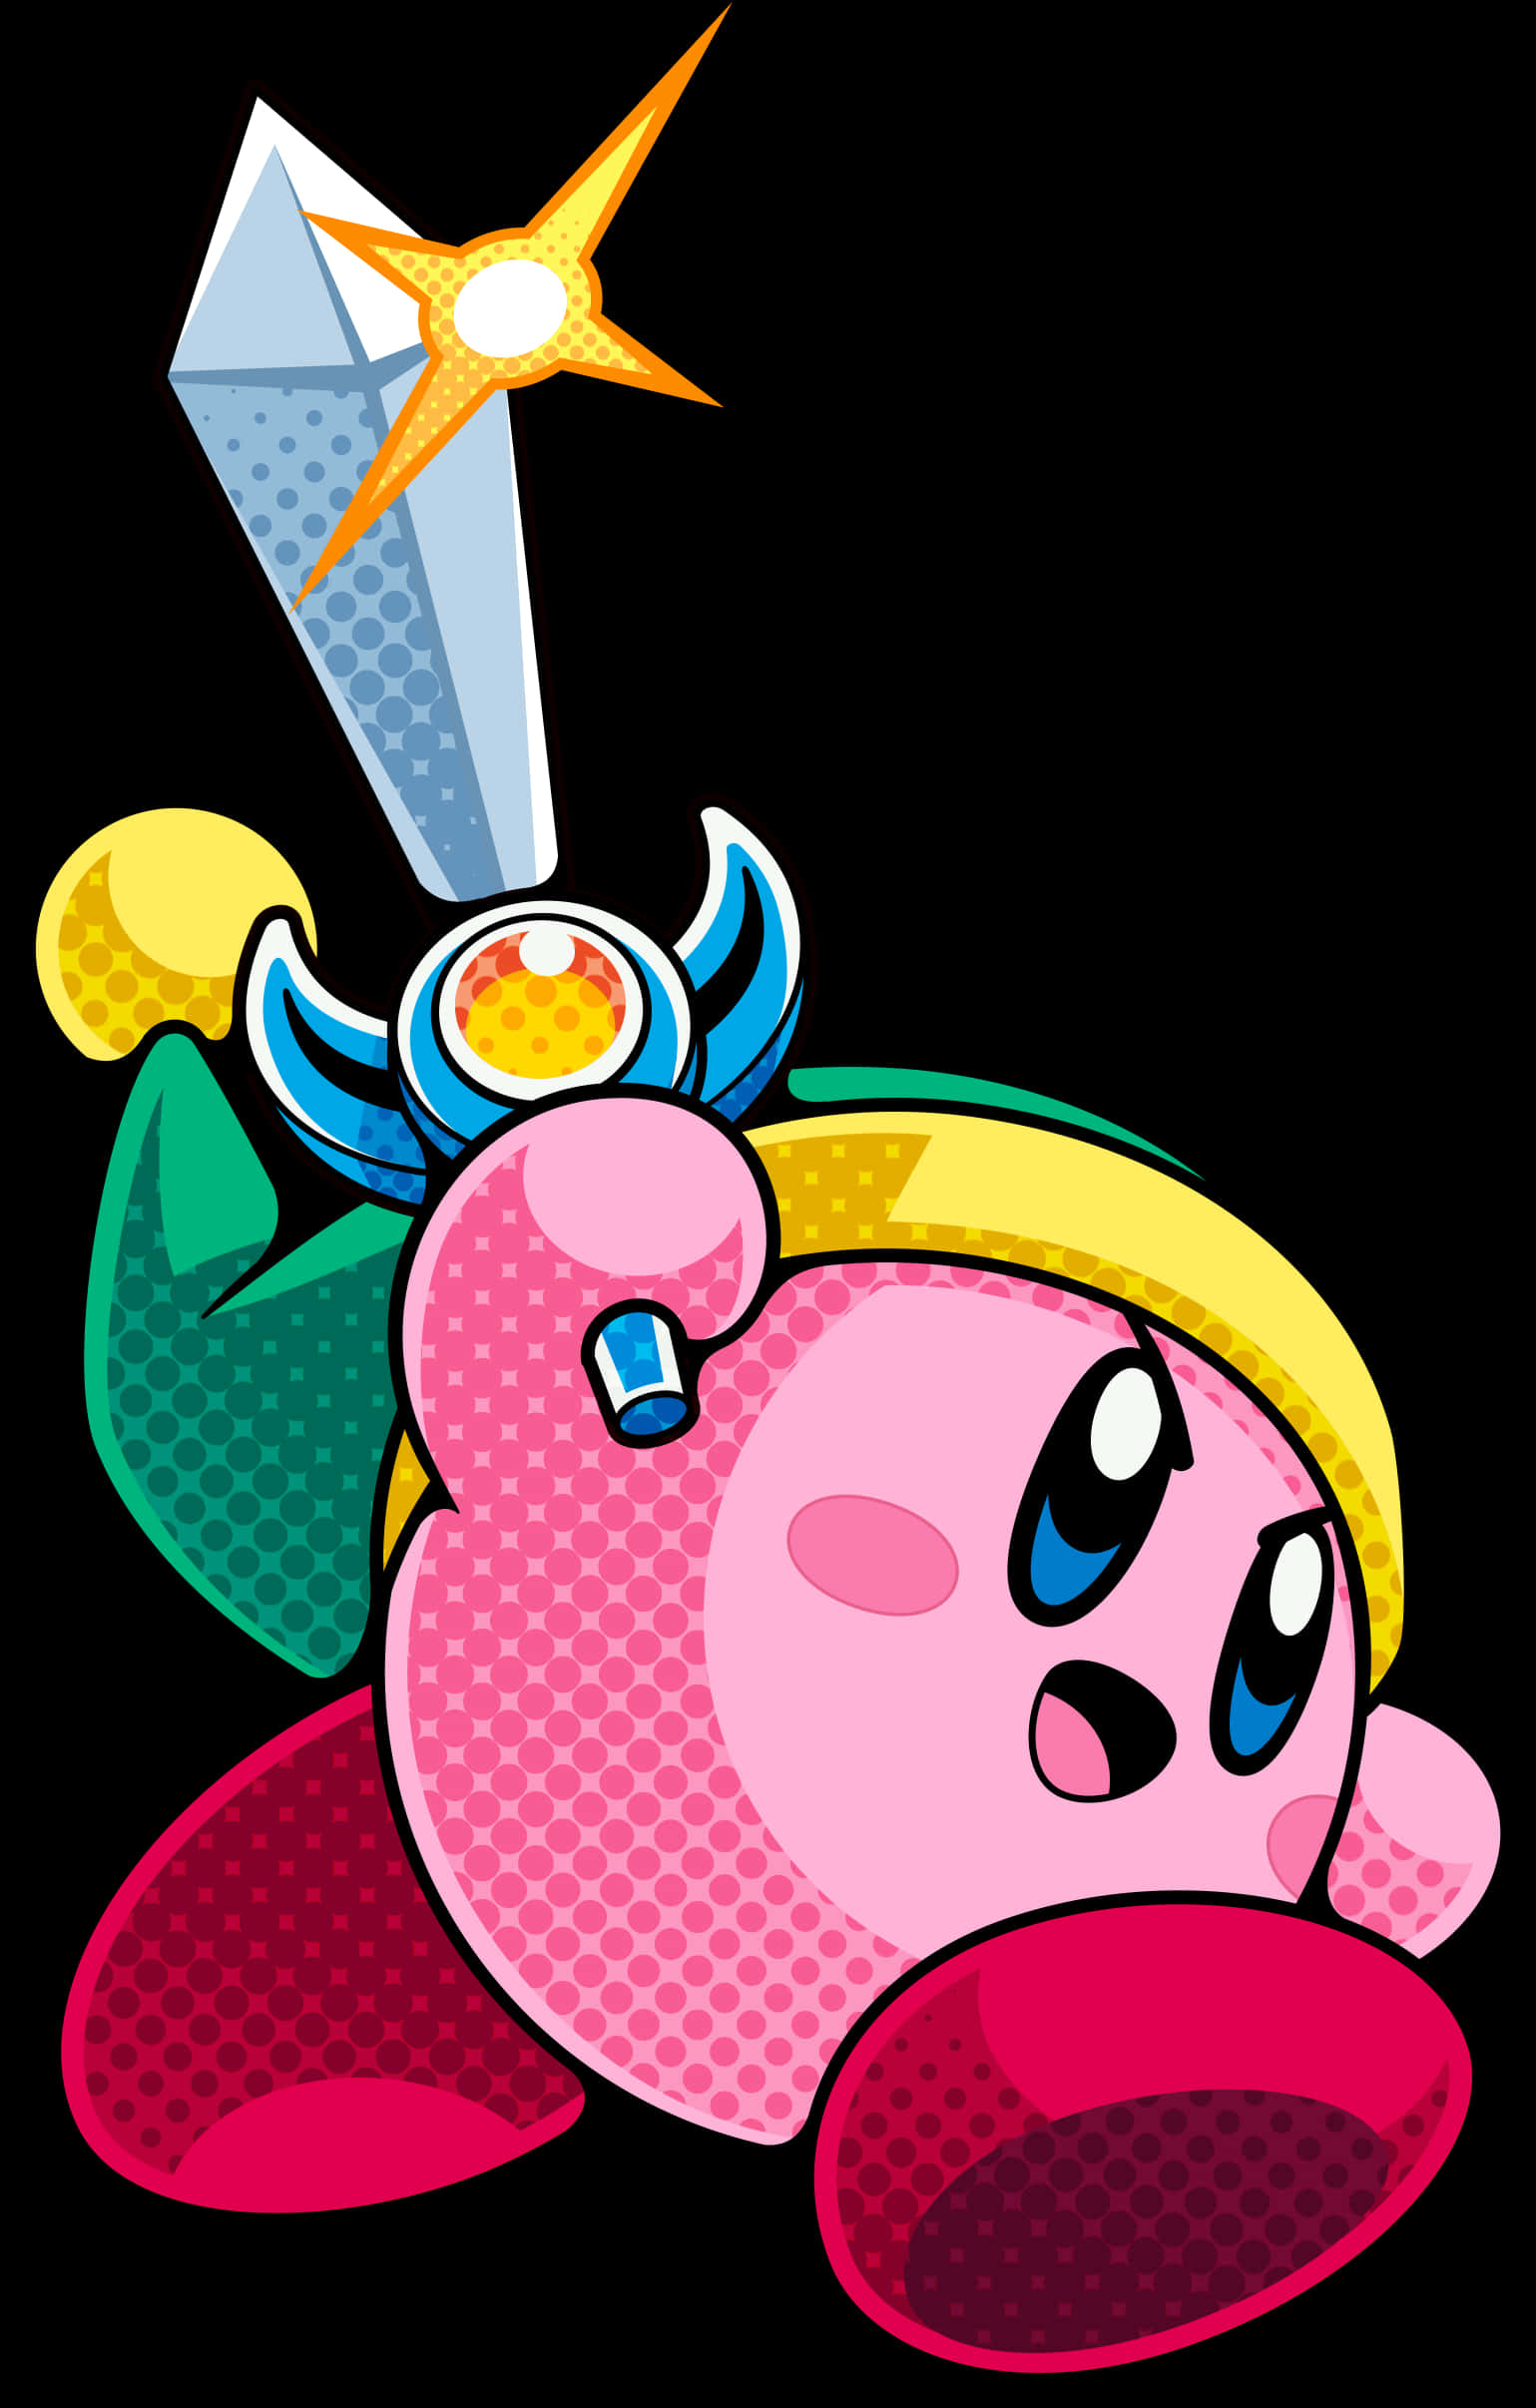 Kirby_with_ Sword_ Illustration PNG image